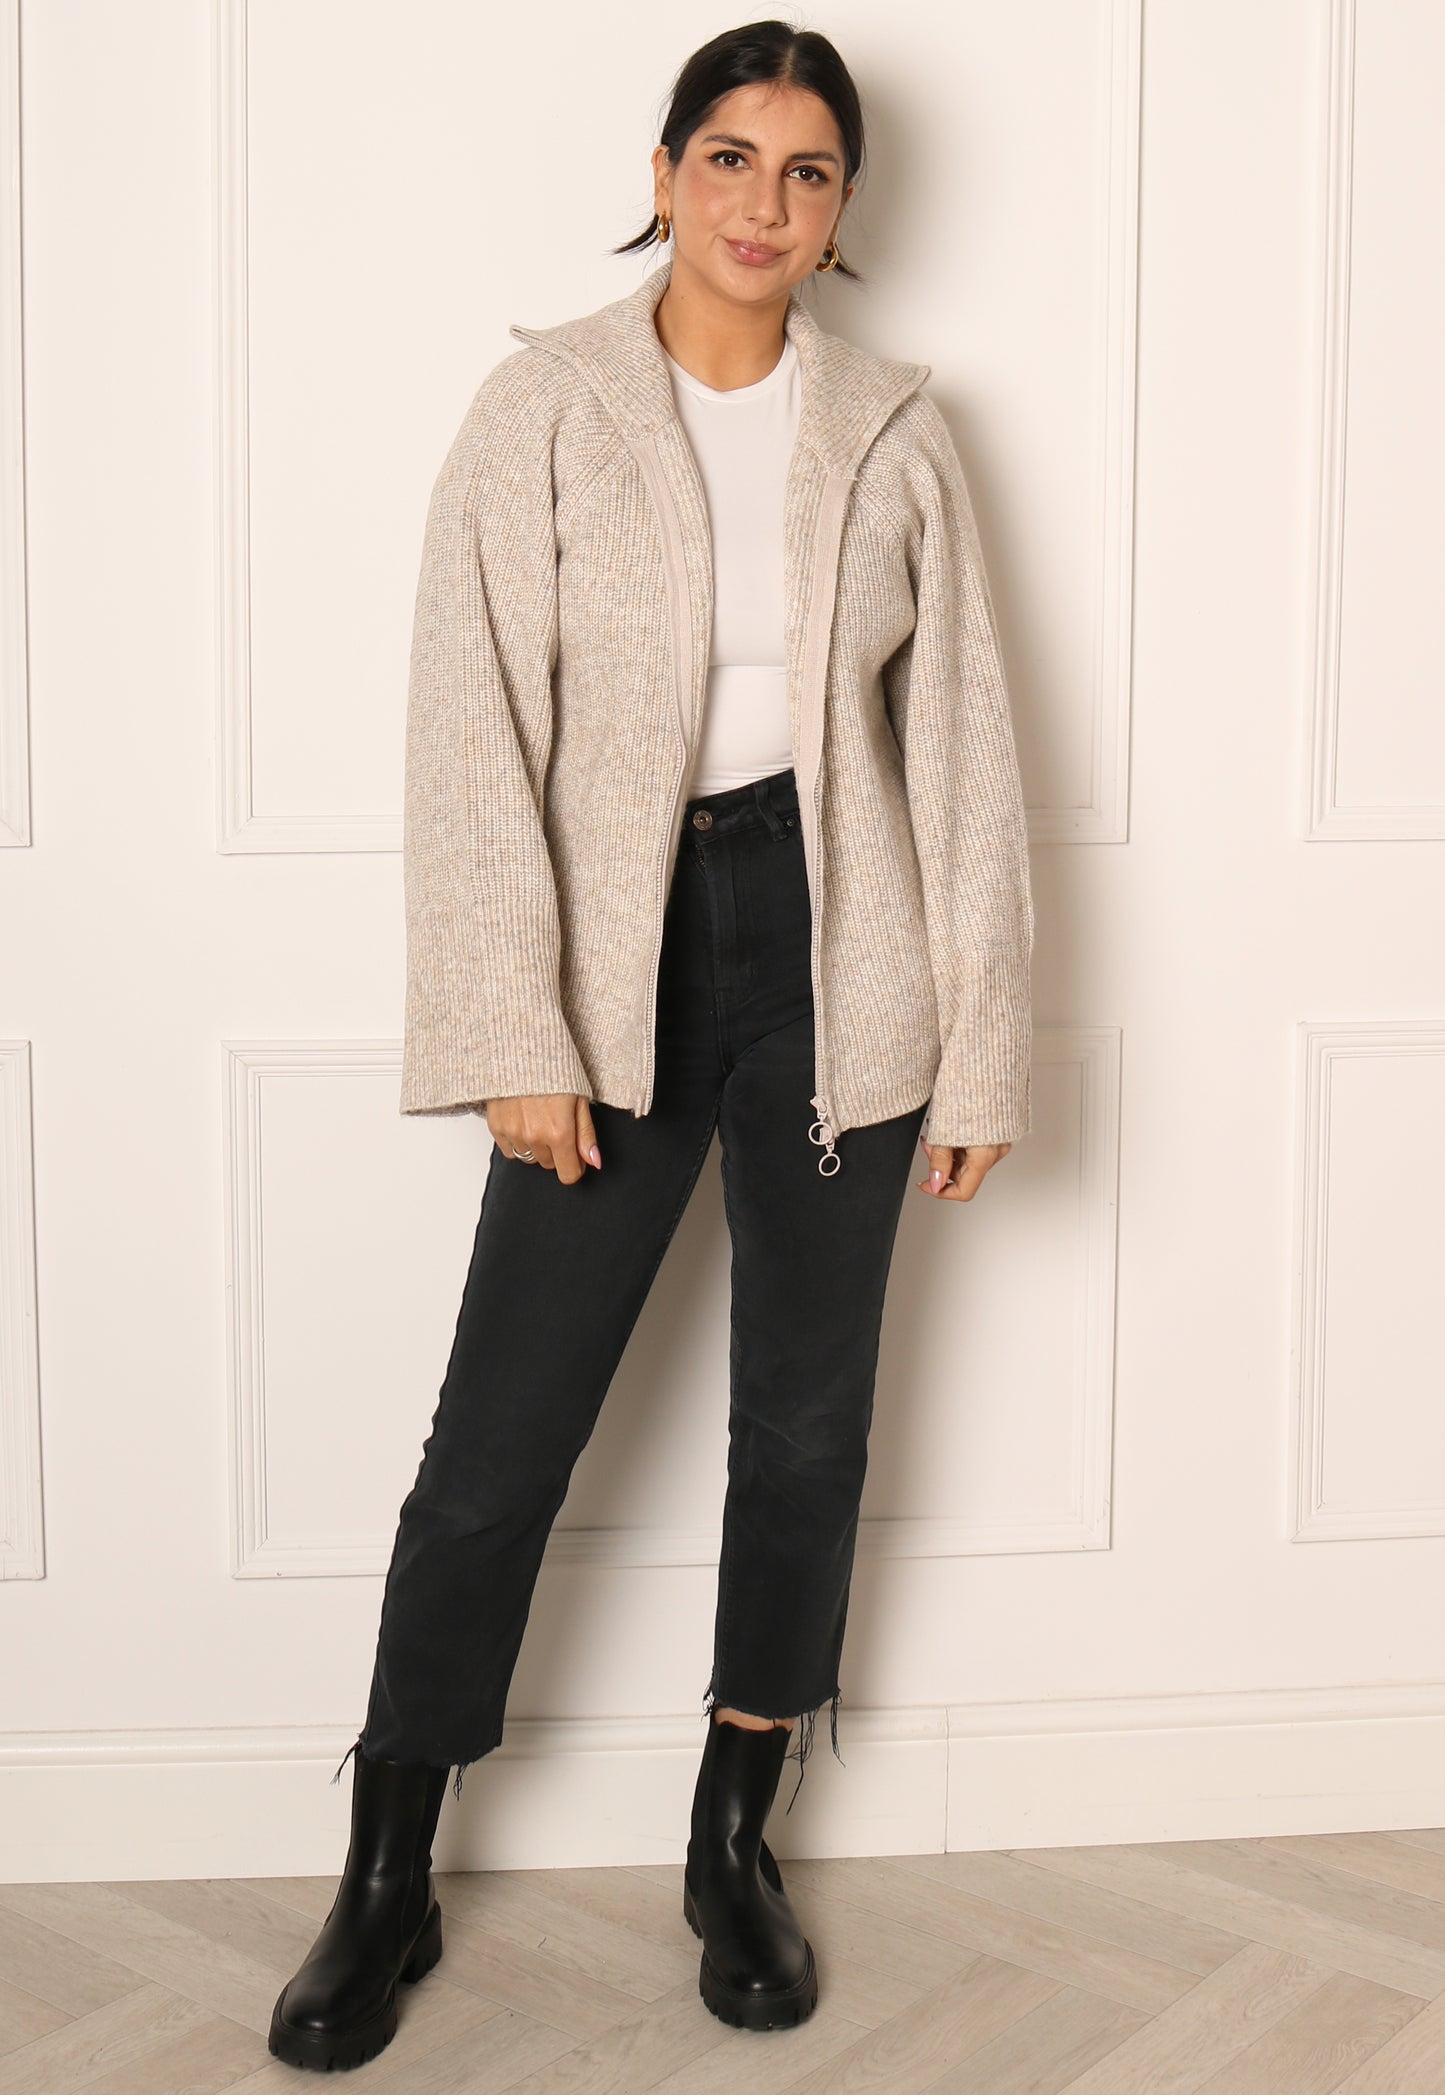 PIECES Jade Chunky Knit Zip Through High Neck Cardigan in Beige Melange - One Nation Clothing